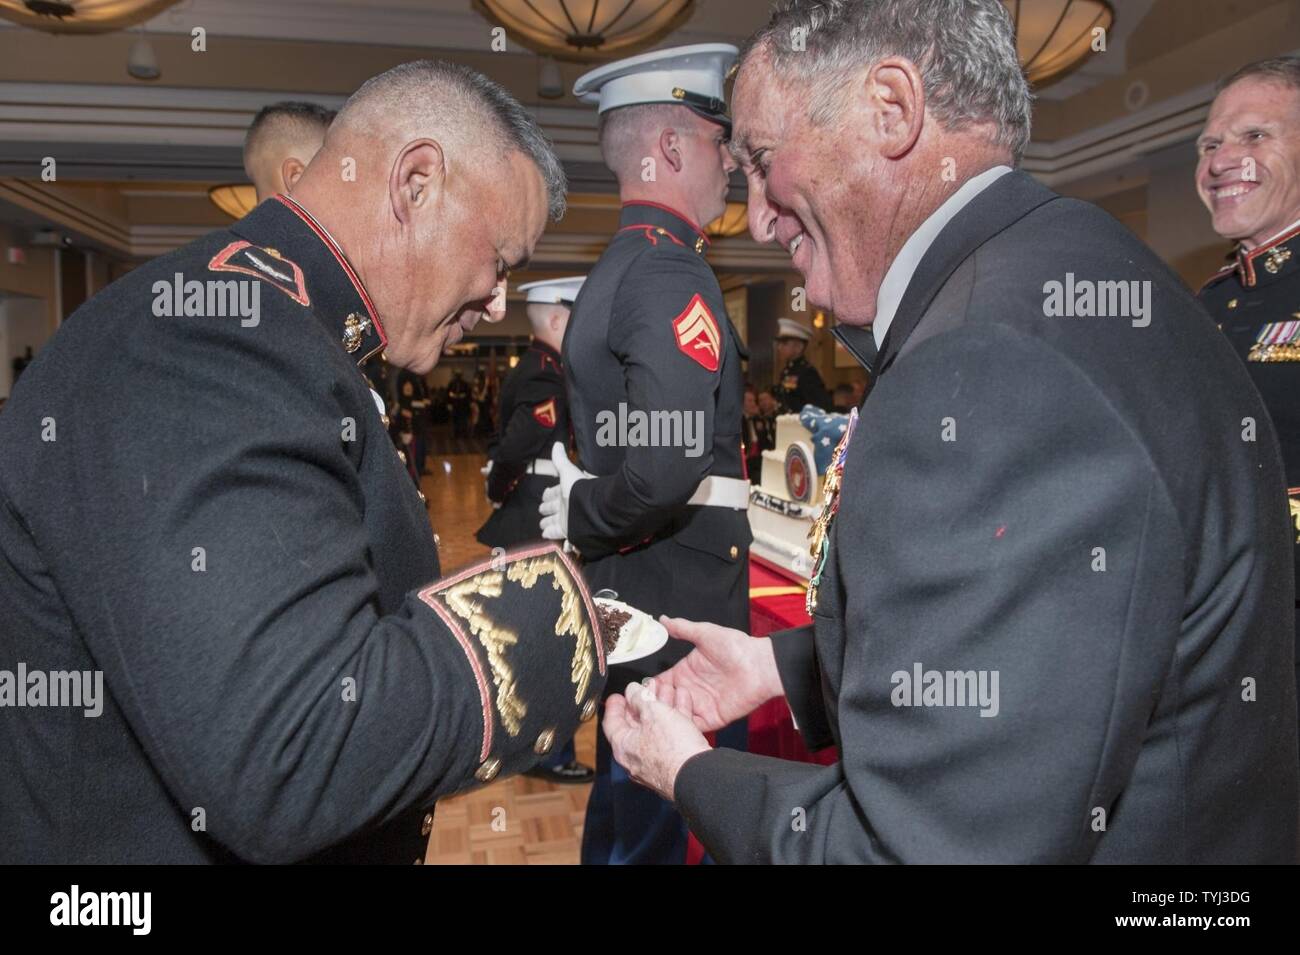 The oldest active duty marine present, left recieves the first peice of cake from U.S. Marine Corps Gen. Charles C. Krulak, ret. 31st Commandant of the Marine Corps, right, during the Marine Corps Combat Development Command and Combat Development and Integration 241st Marine Corps Birthday Ball, The Clubs at Quantico, Quantico, Va, Nov. 10, 2016. The attendees celebrated the 241st birthday with the reading of General John A. Lejeune’s birthday message and a traditional cake cutting ceremony. Stock Photo